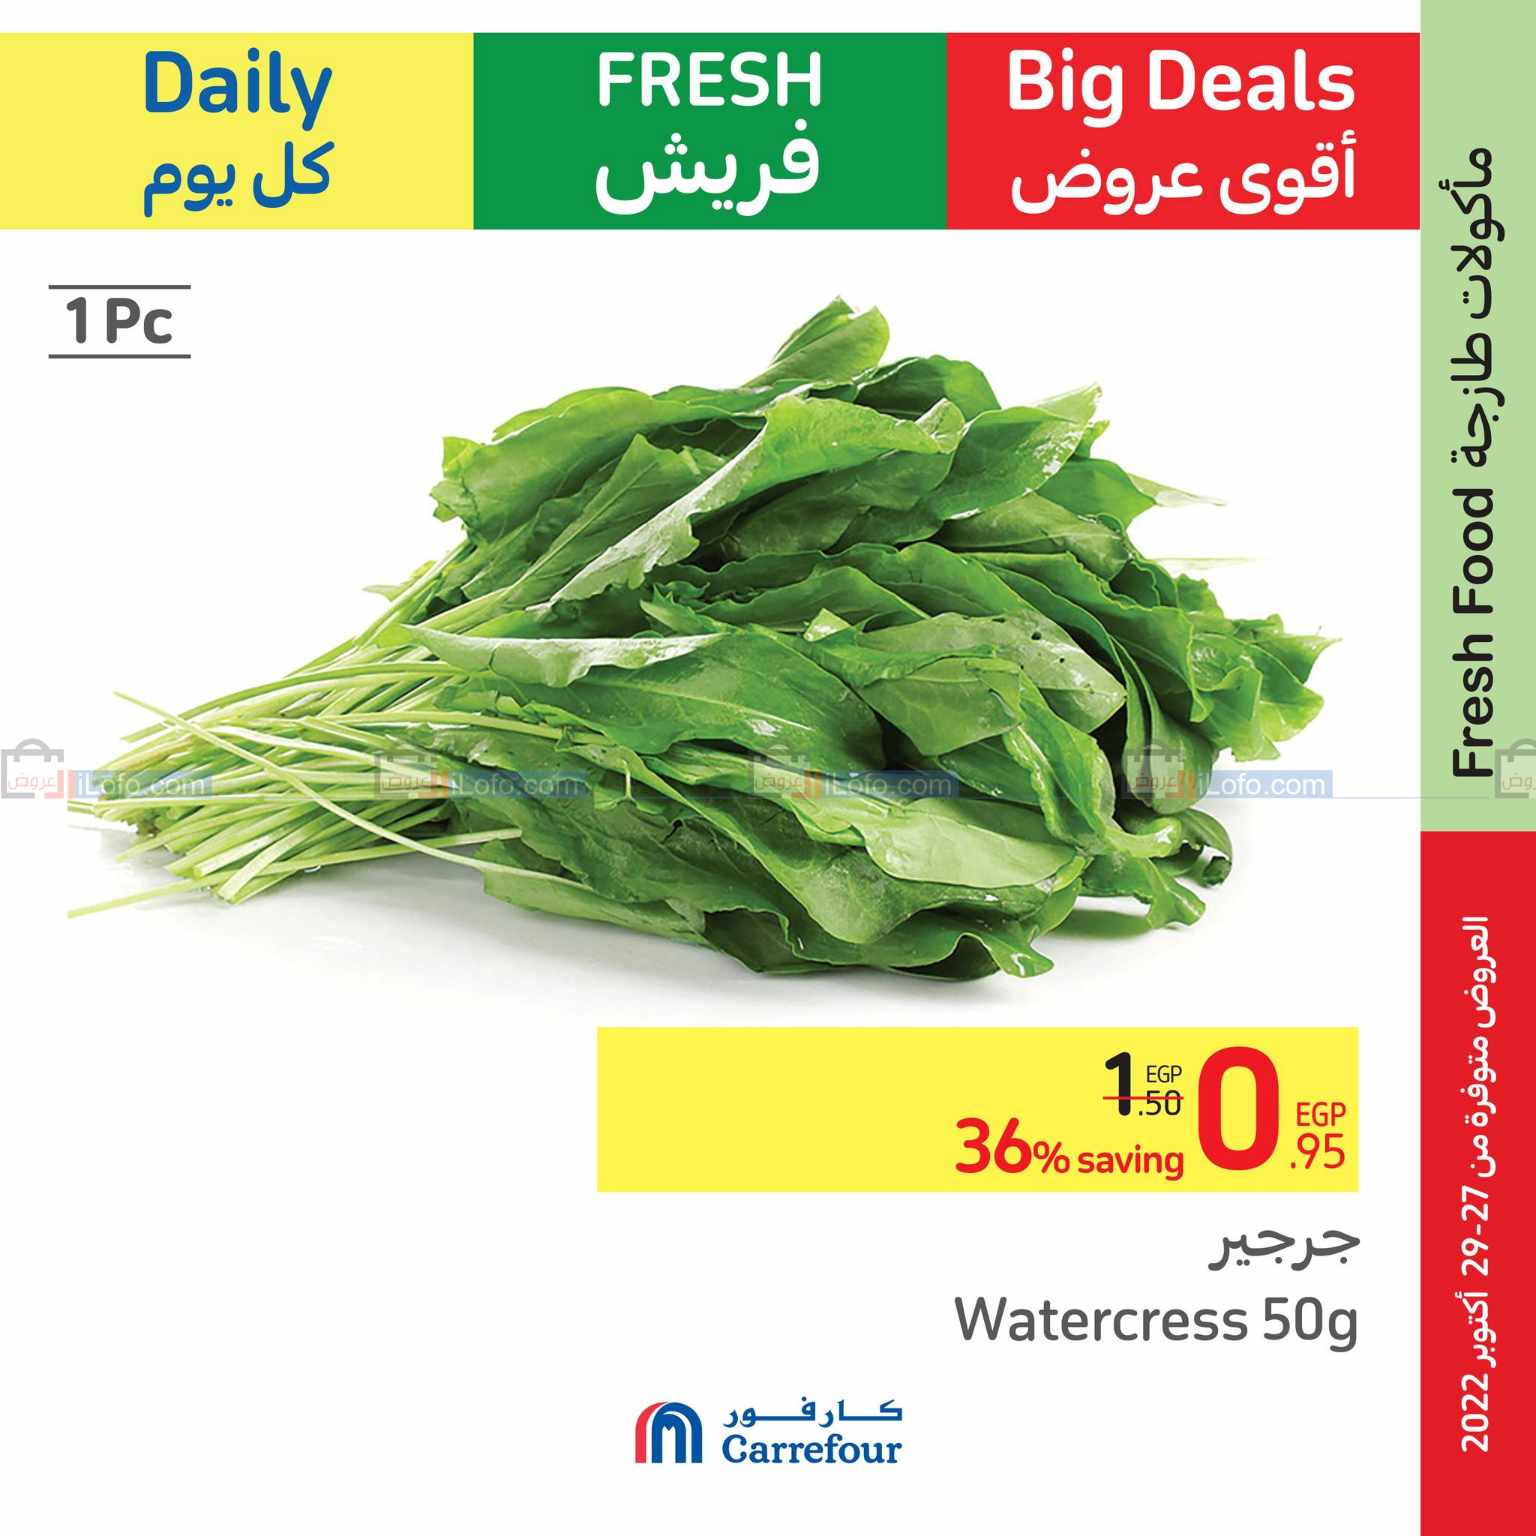 Page 12 at Fresh Deals at Carrefour Egypt 